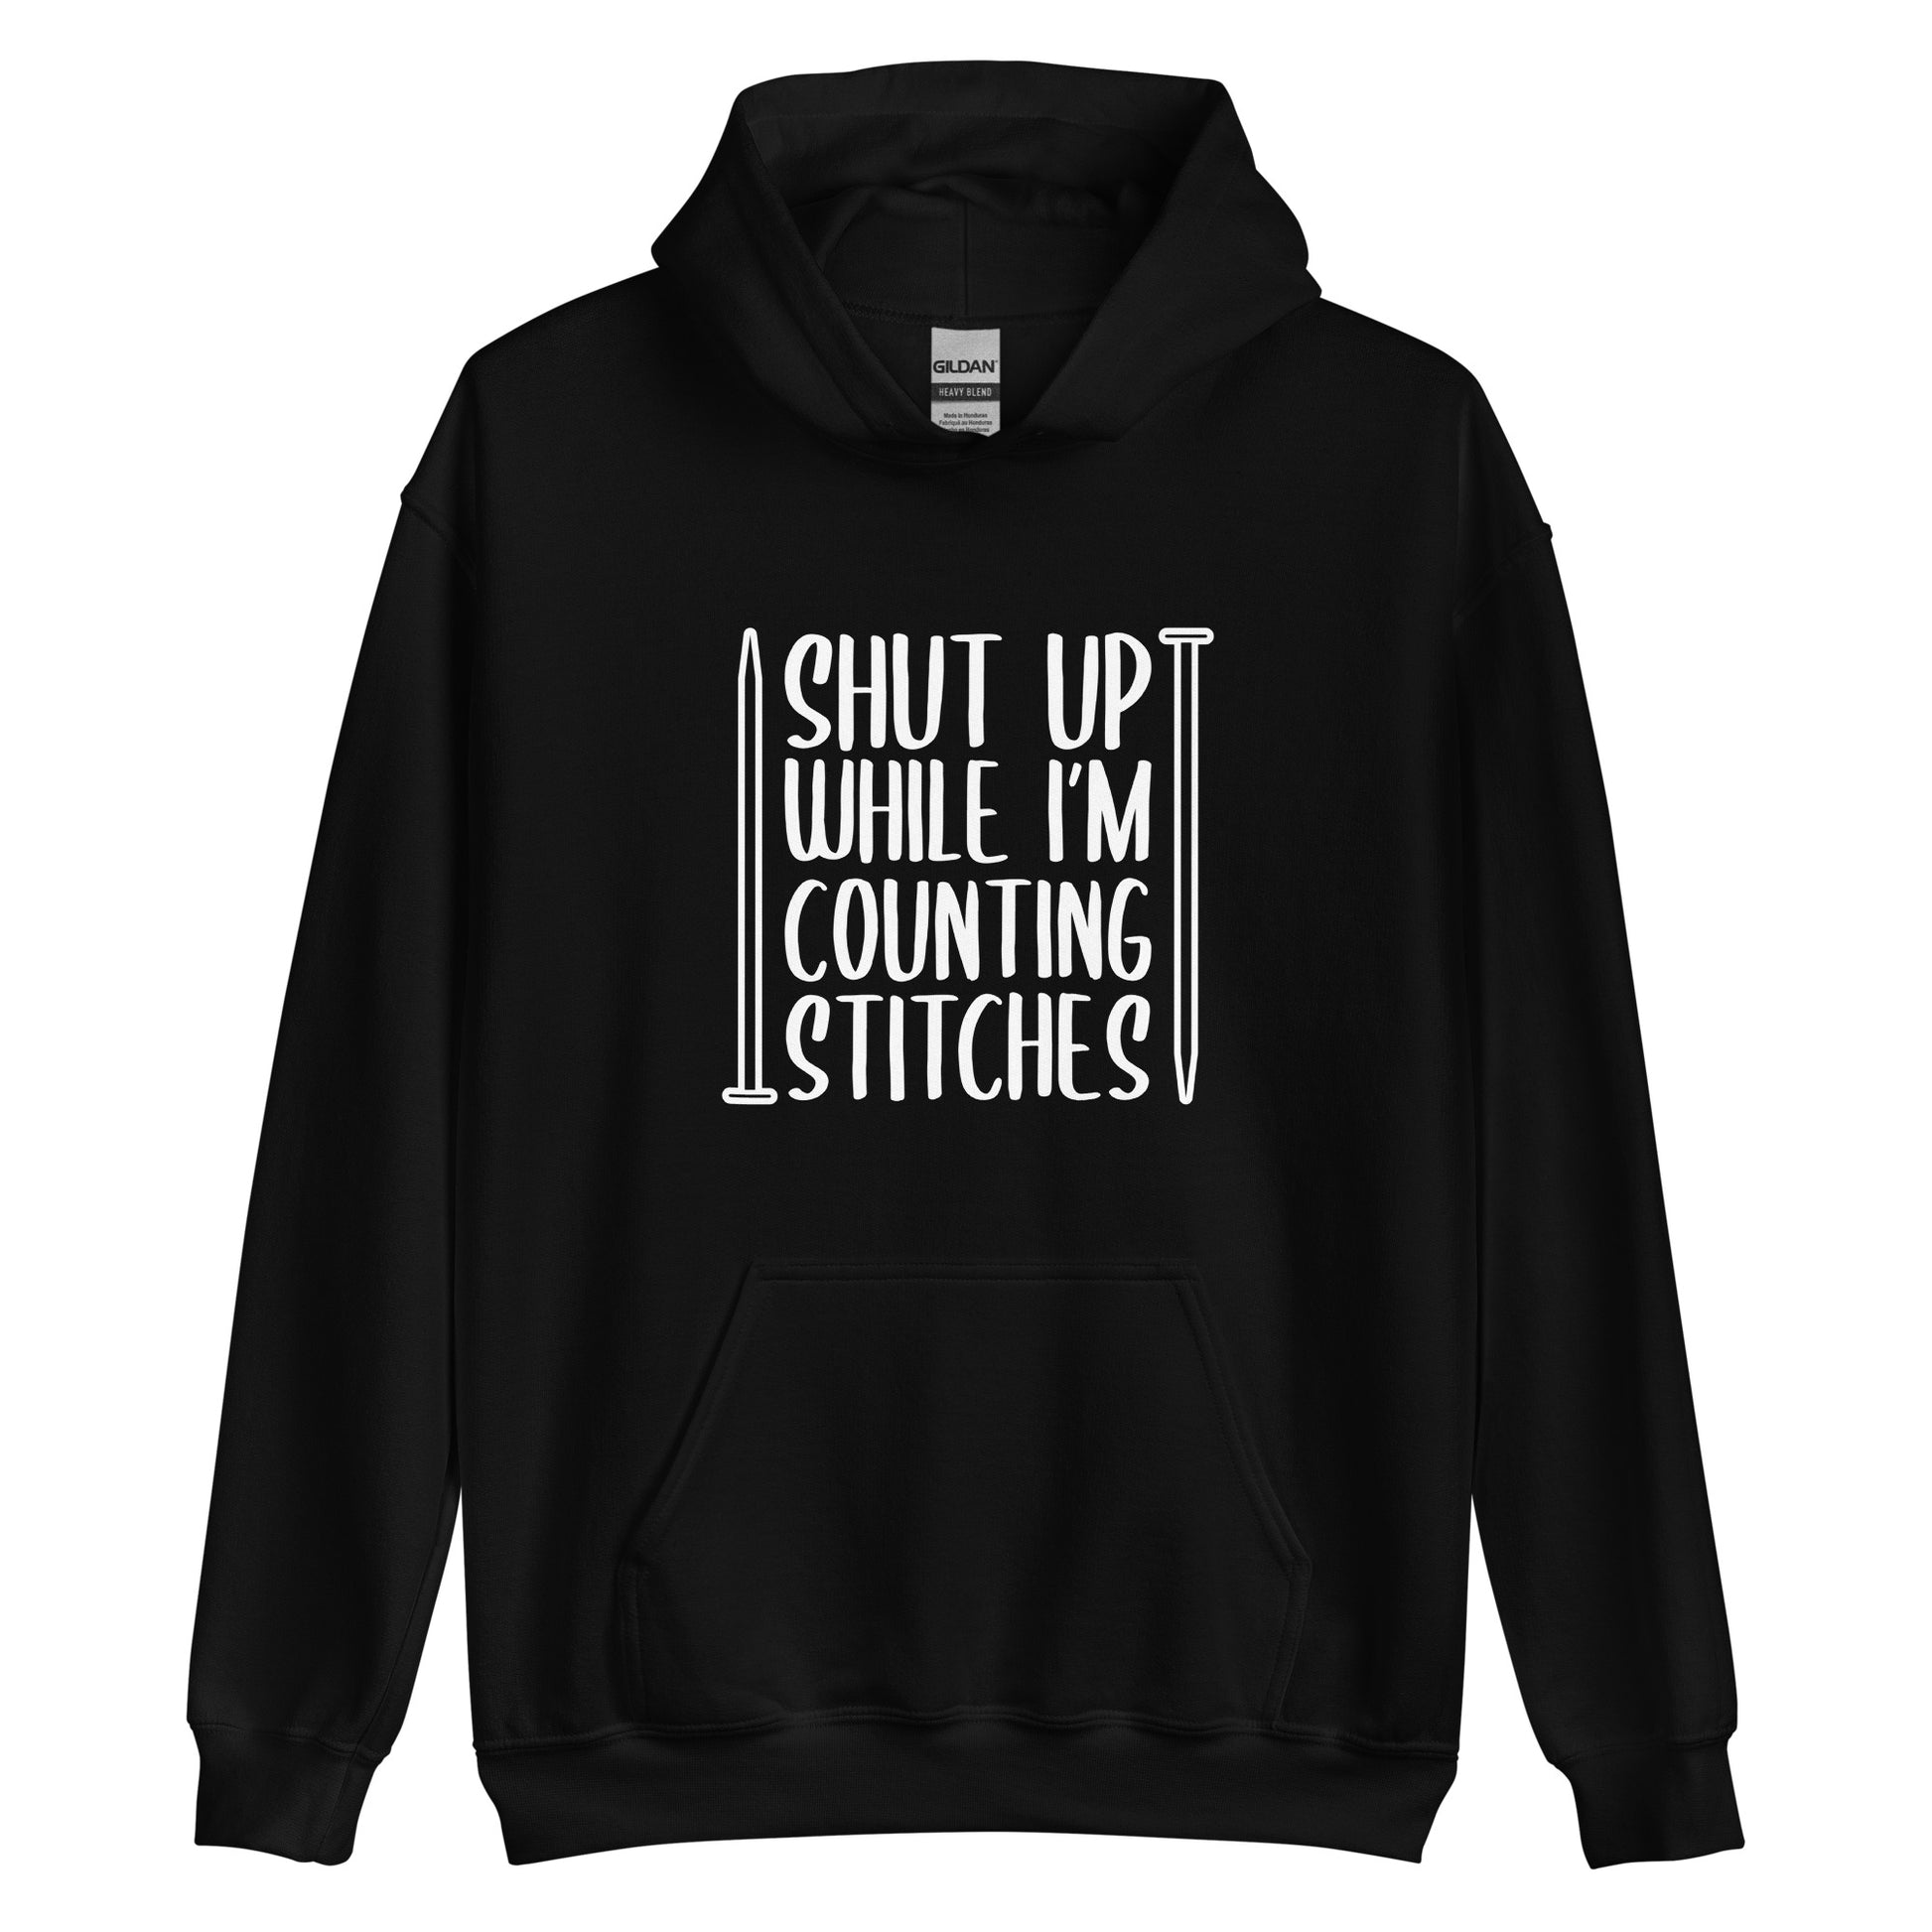 A black hooded sweatshirt with white text surrounded by two knitting needles. The text reads "Shut up while I'm counting stiches".